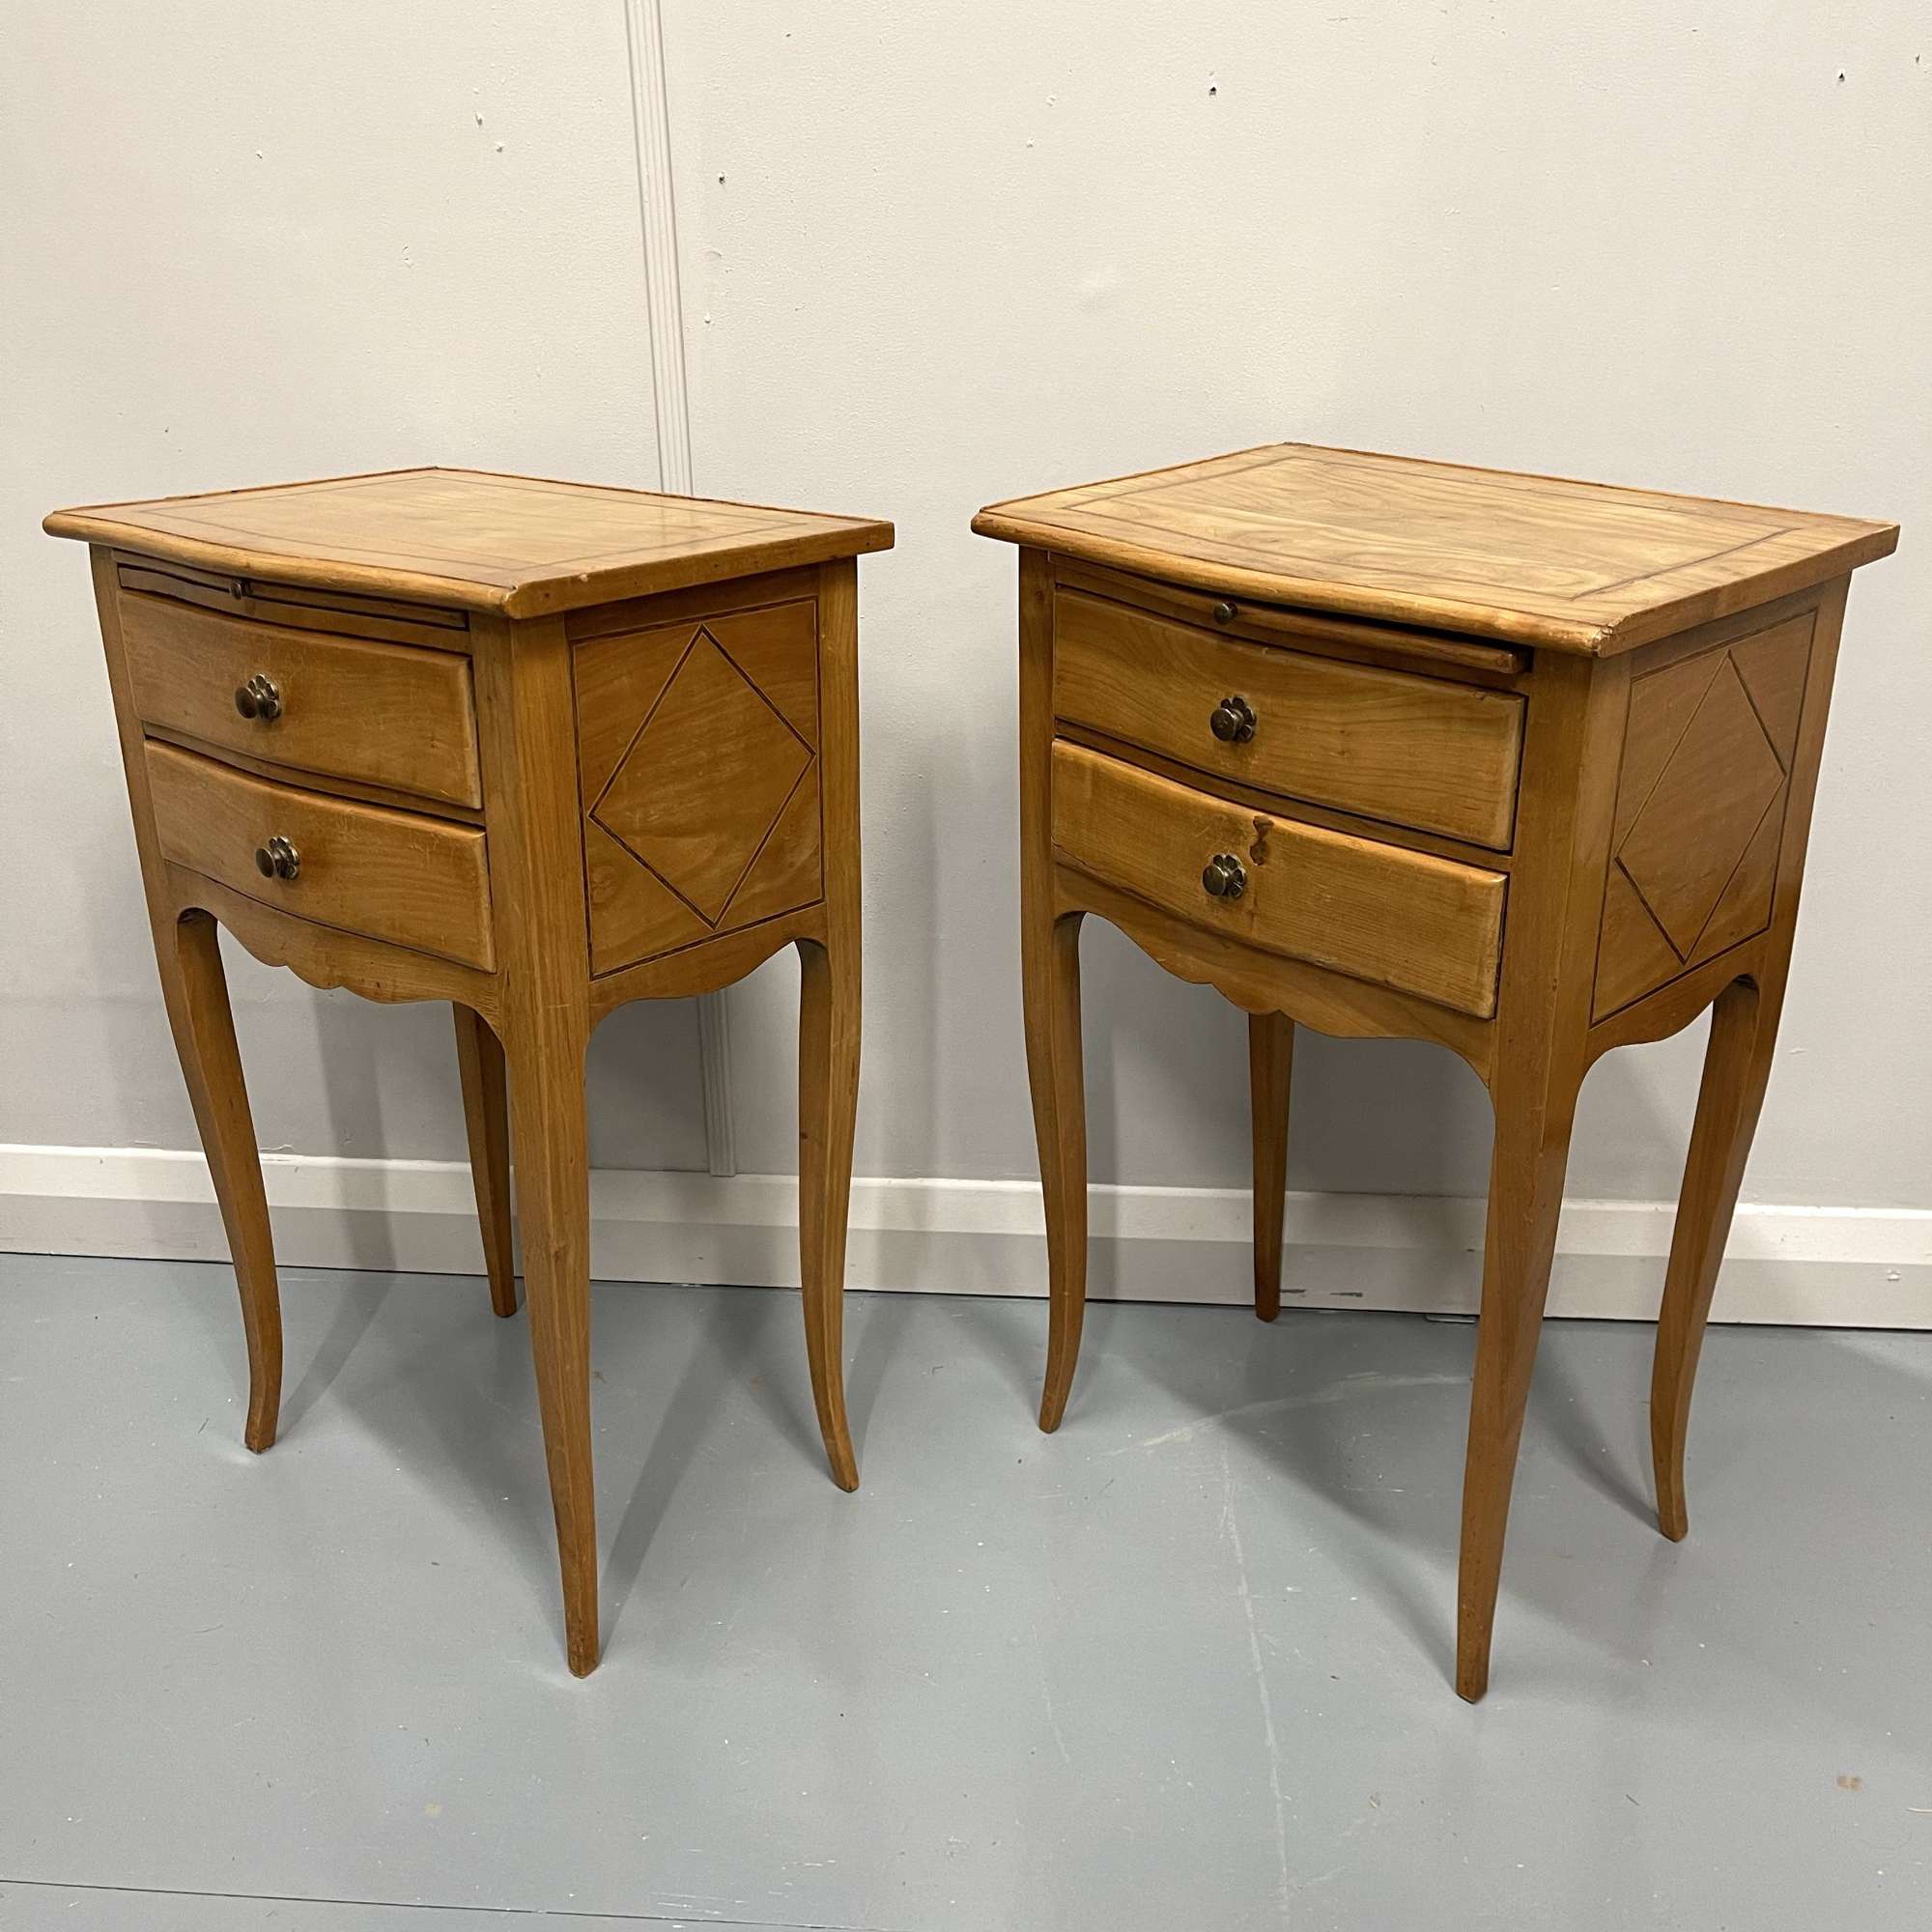 Pair Of French Ash Inlaid Bedside Tables With Candle Slides